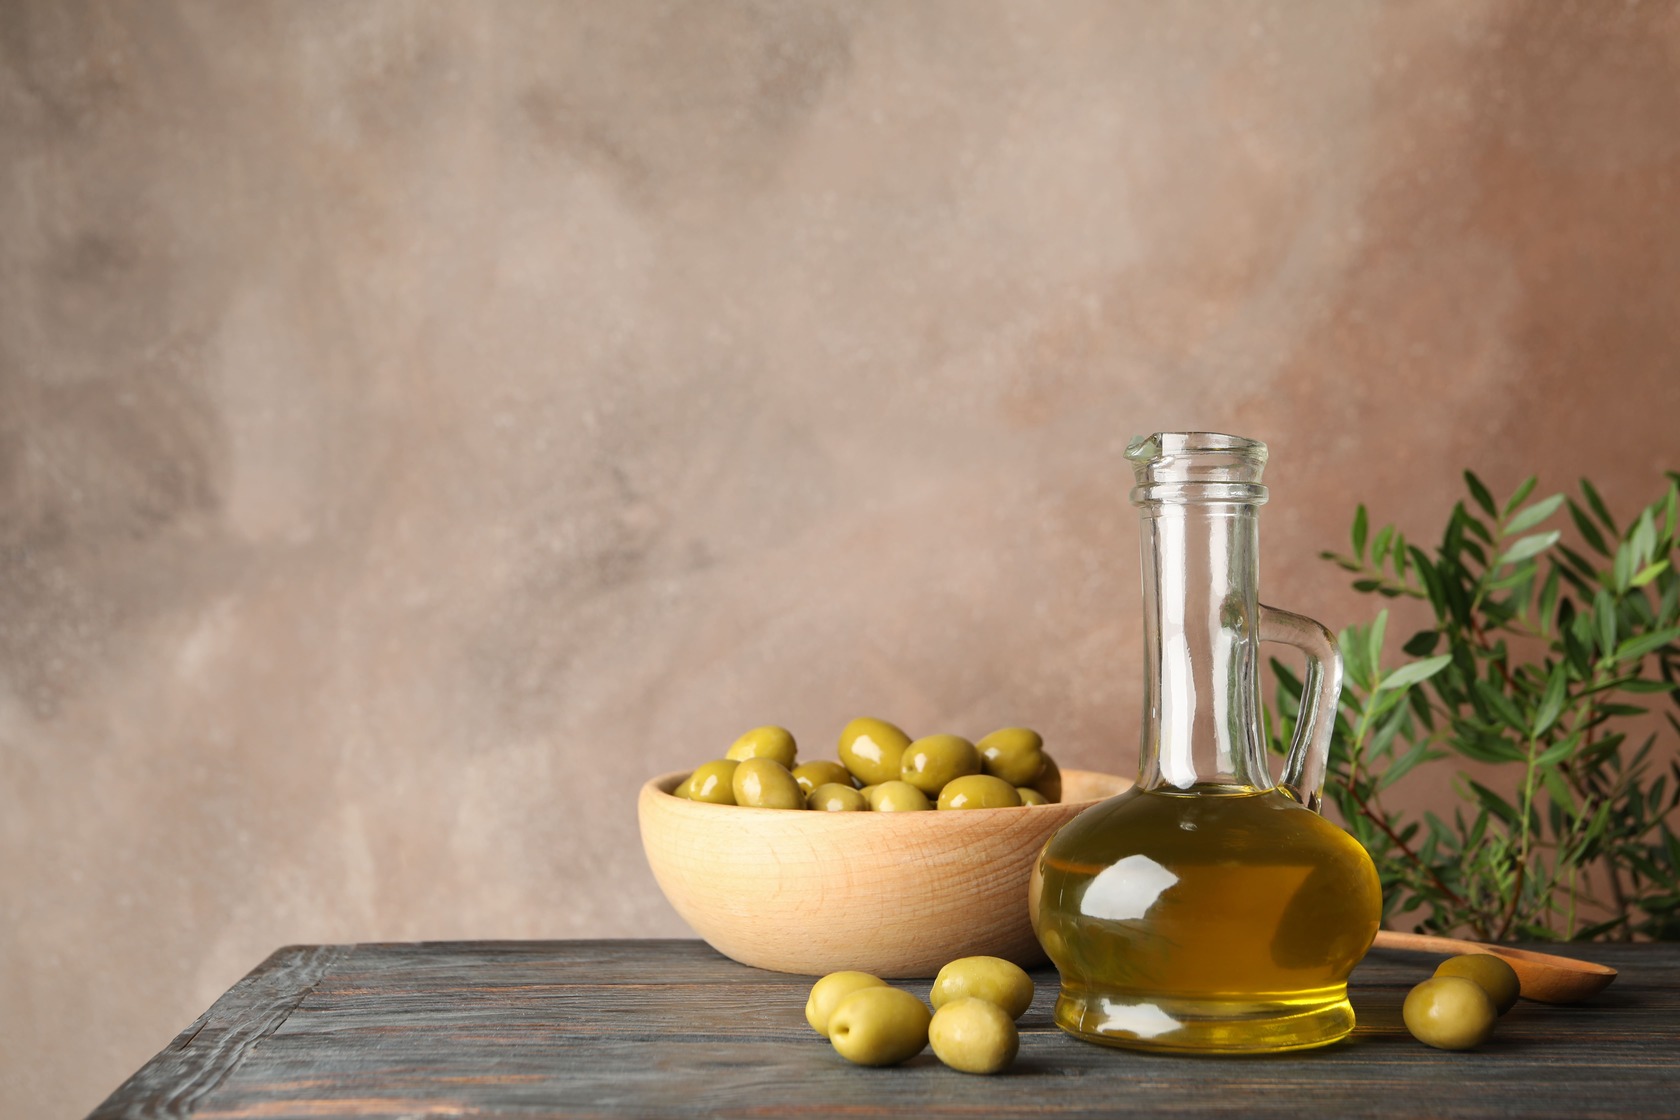 composition-with-olive-oil-and-olives-on-wooden-ta-2021-09-02-20-17-06-utc-1.jpg